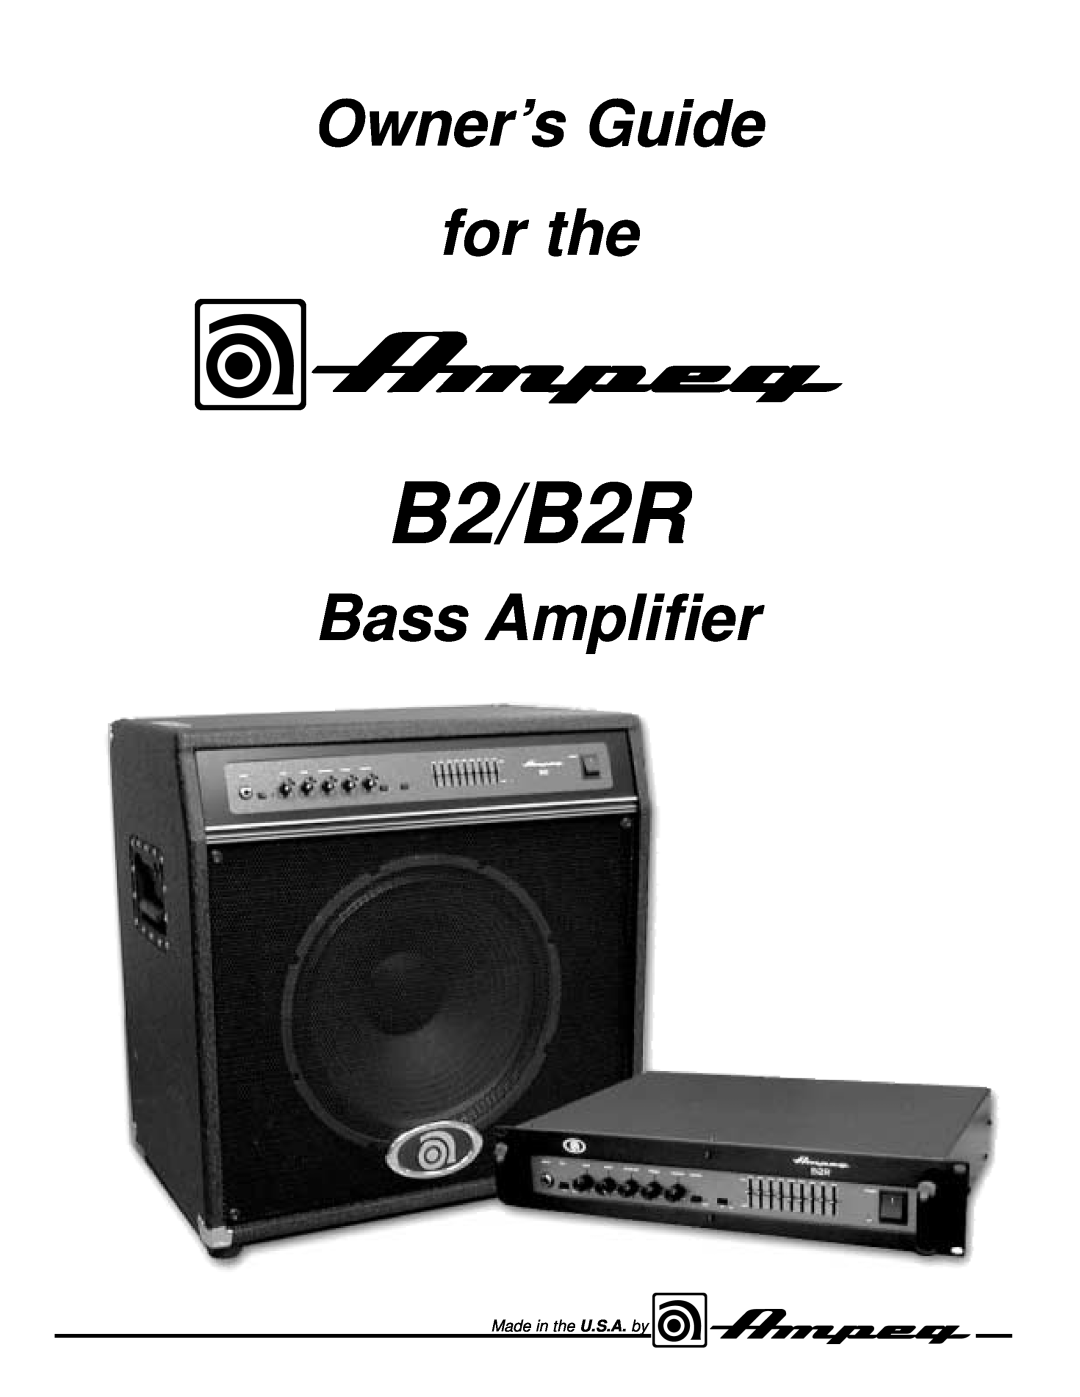 Ampeg manual B2/B2R, Owner’s Guide for the, Bass Amplifier, Made in the U.S.A. by 